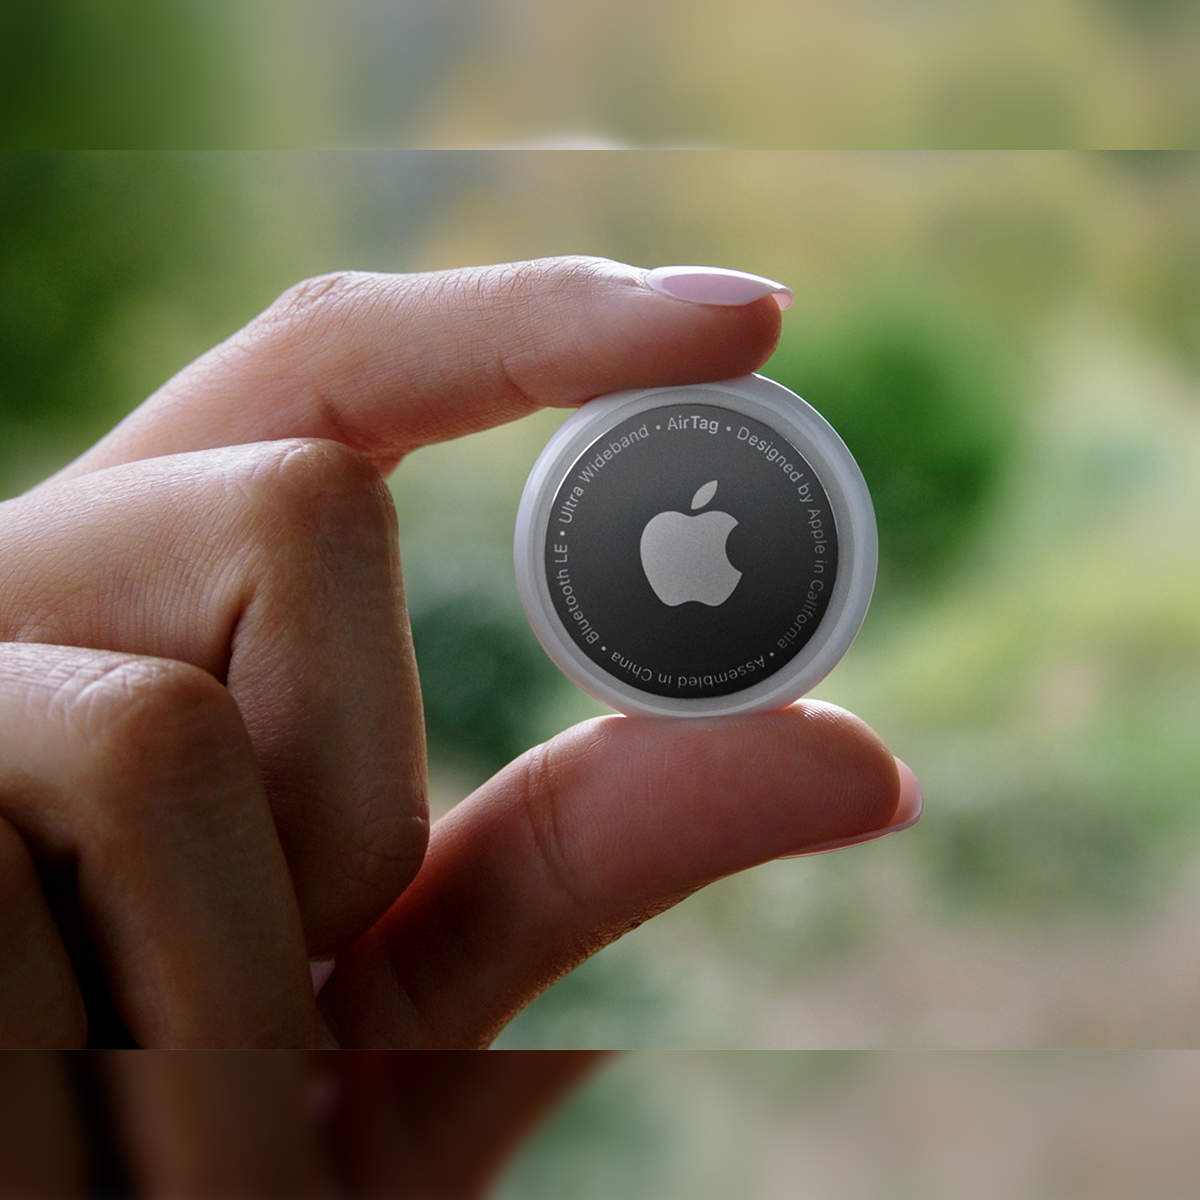 Lost something? Apple's affordable tracker can hunt it down for you